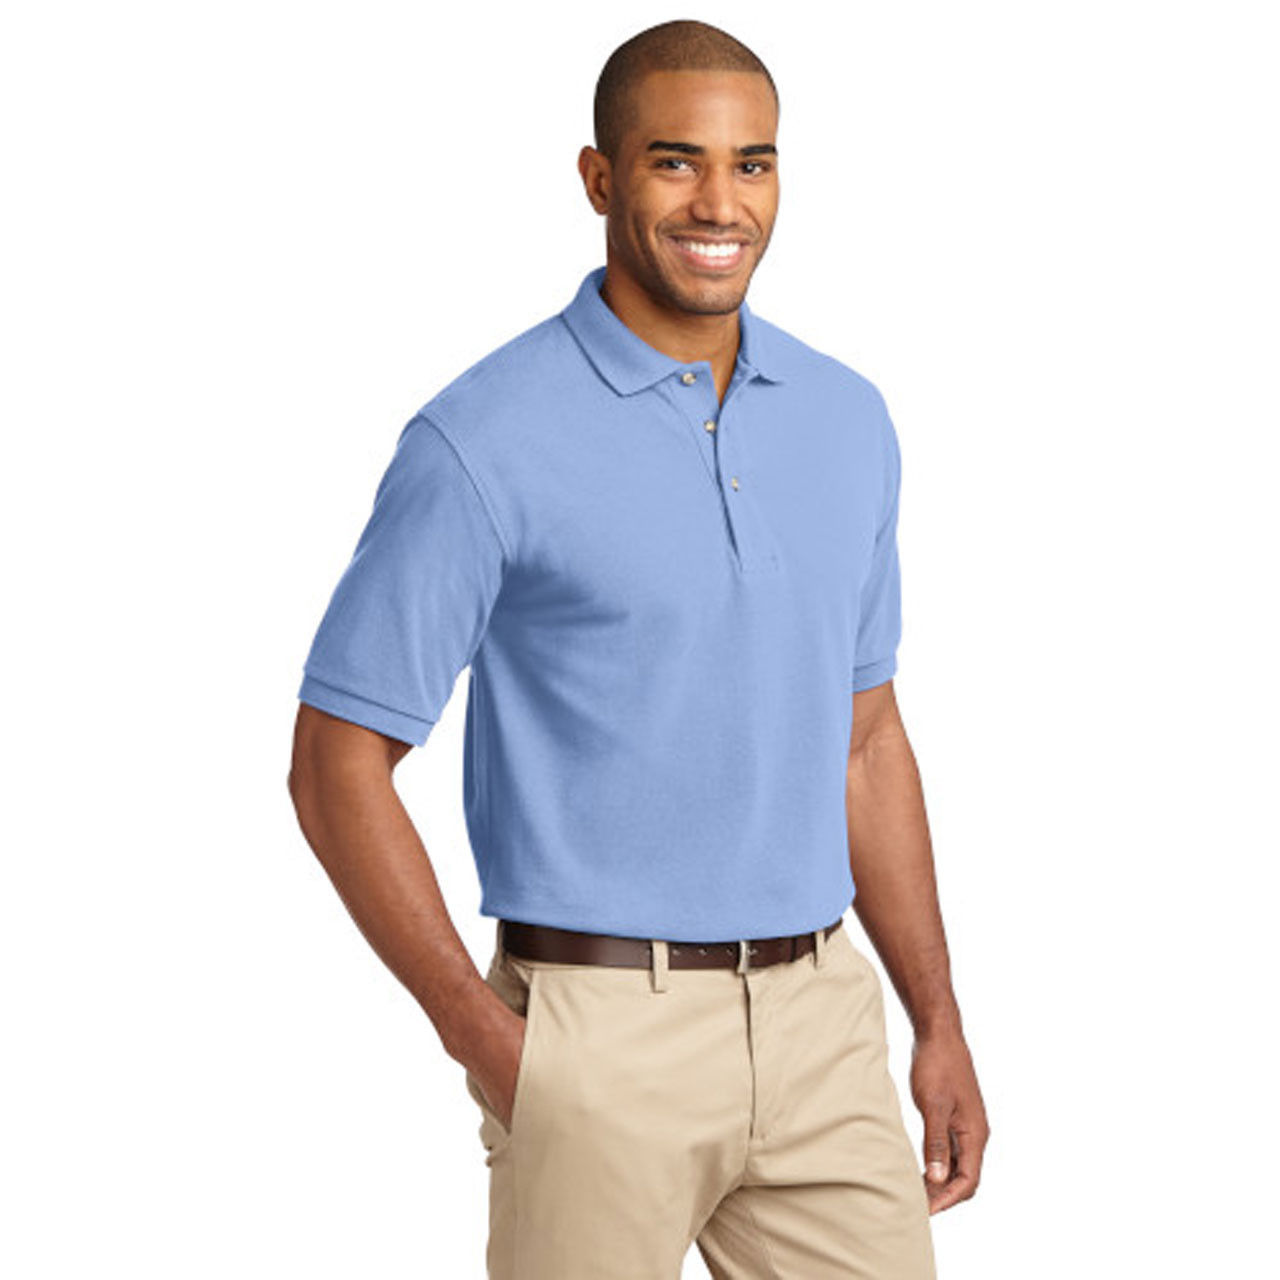 Does the blue polo shirt with khaki pants have a certain collar and cuff type?